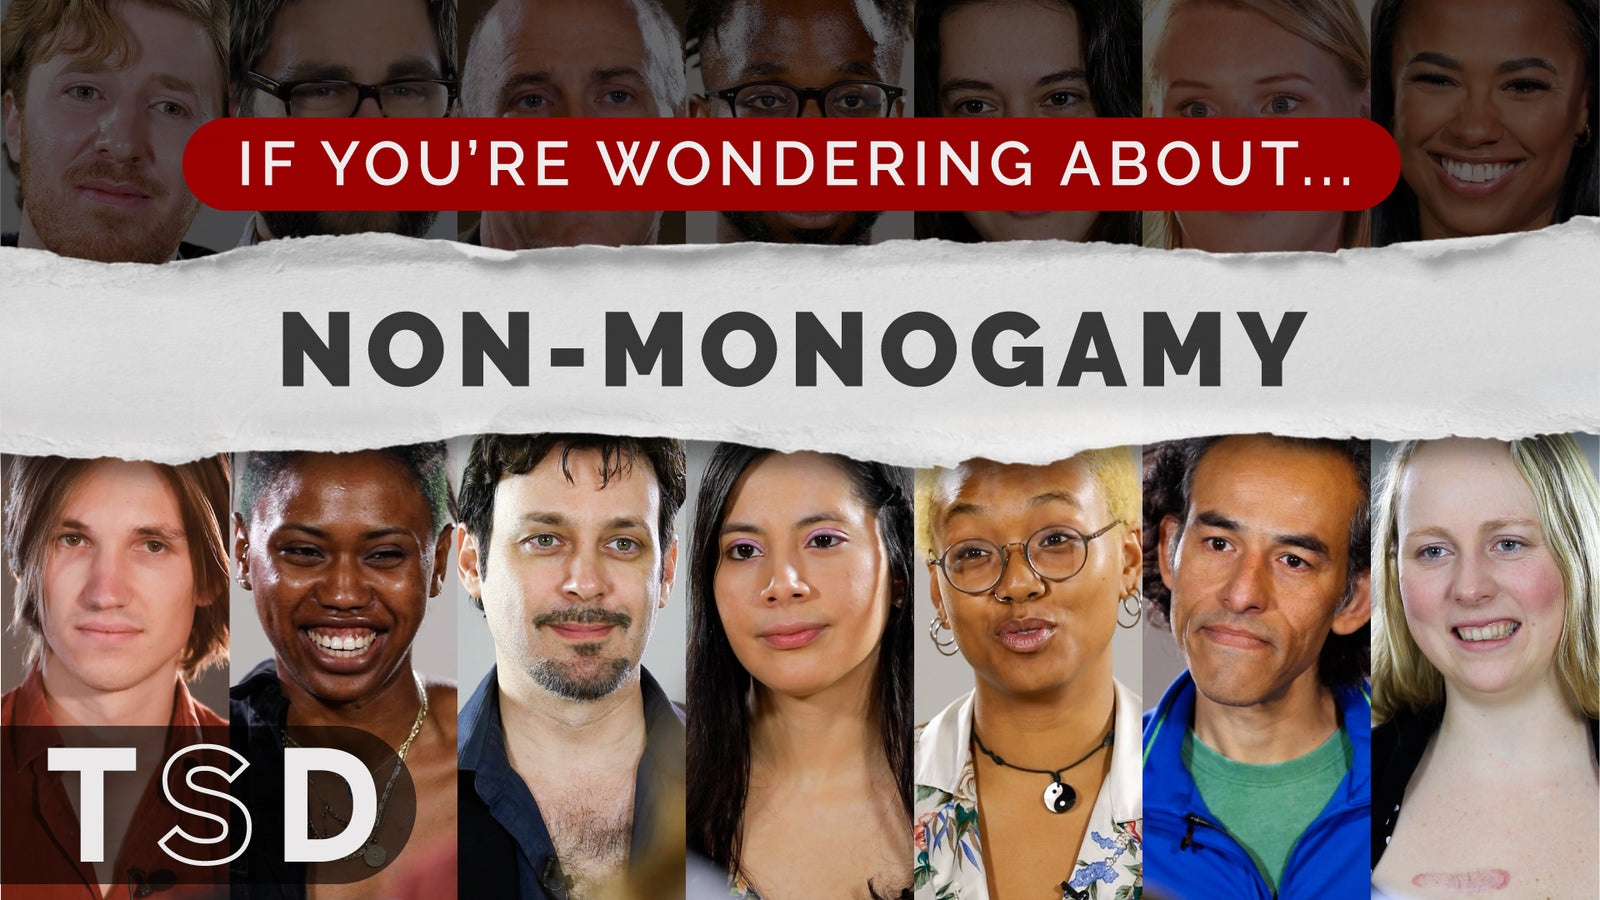 [VIDEO] If You're Wondering About... Non-Monogamy